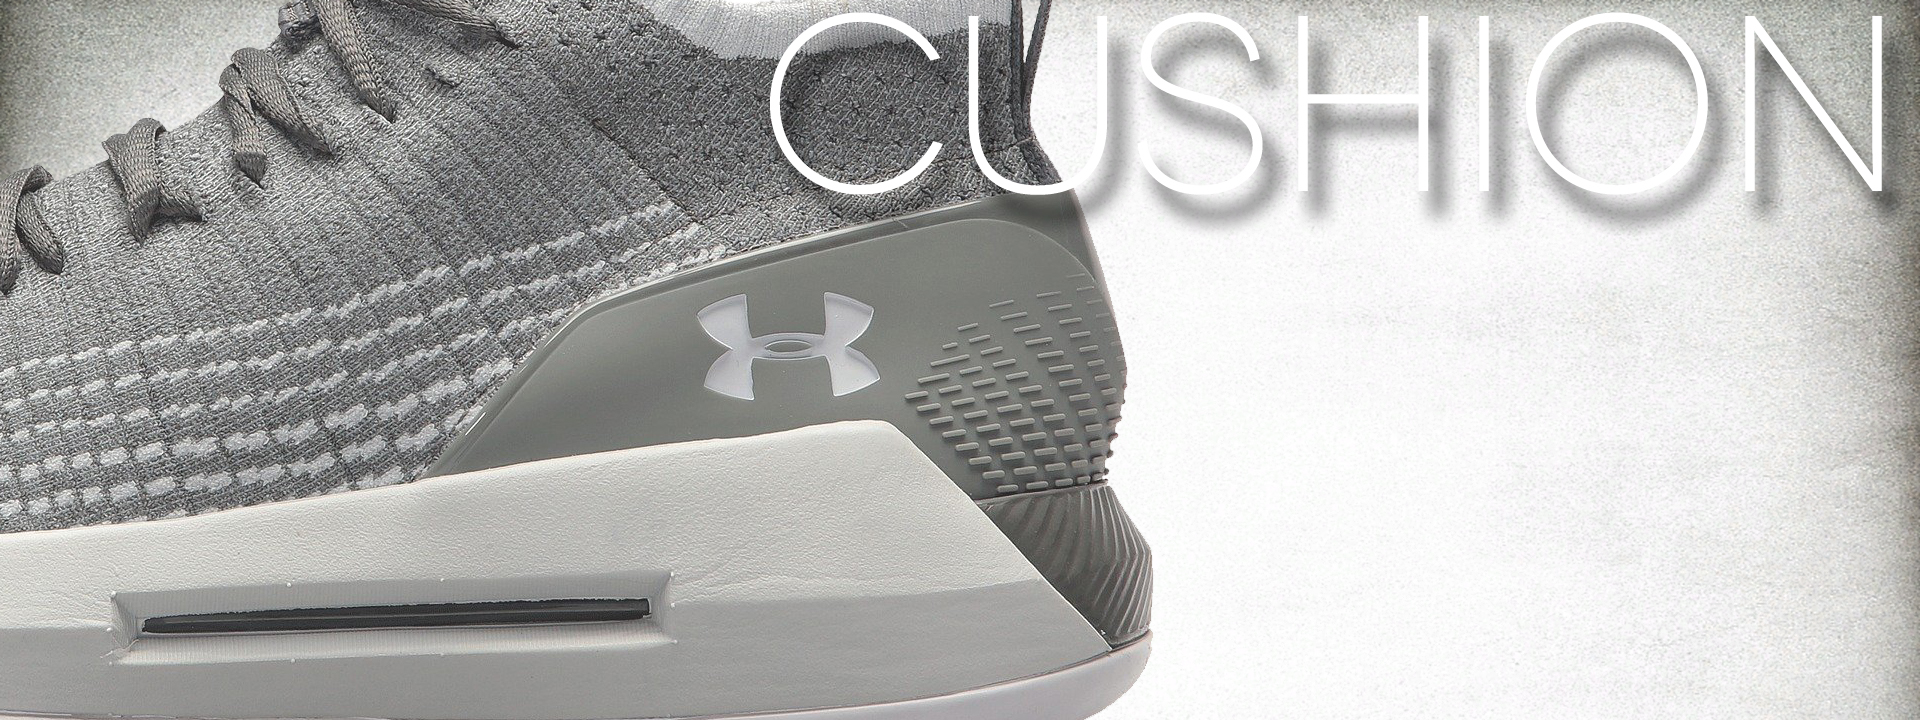 Under Armour Heat Seeker Performance Review cushion